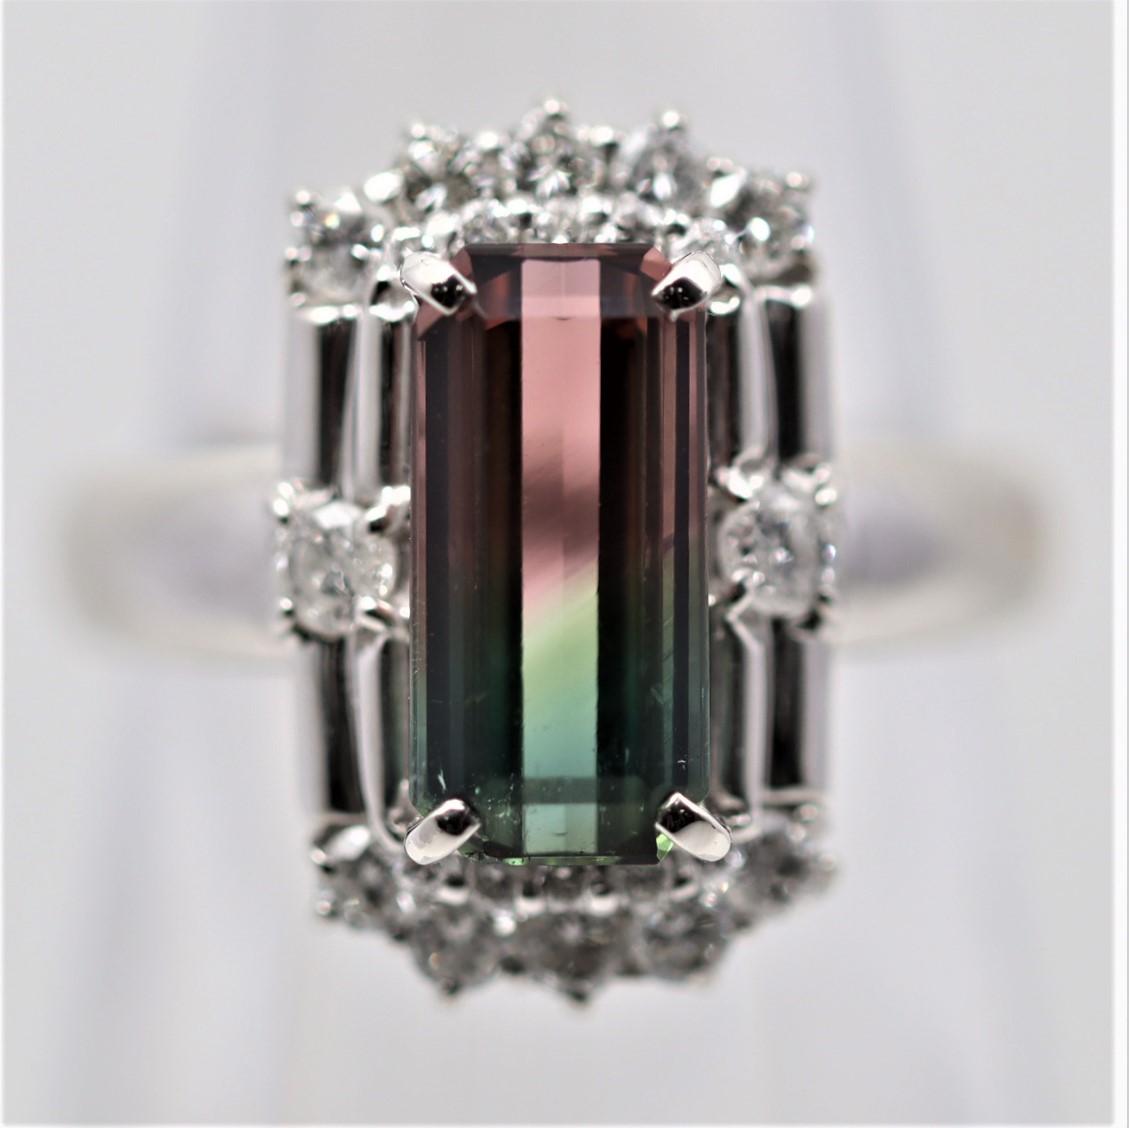 A simple yet unique and eye-catching ring featuring a bi-color tourmaline (green and pink) giving it the trade name watermelon tourmaline. It weighs 2.68 carats and is accented by 0.64 carats of round brilliant-cut diamonds set around it.